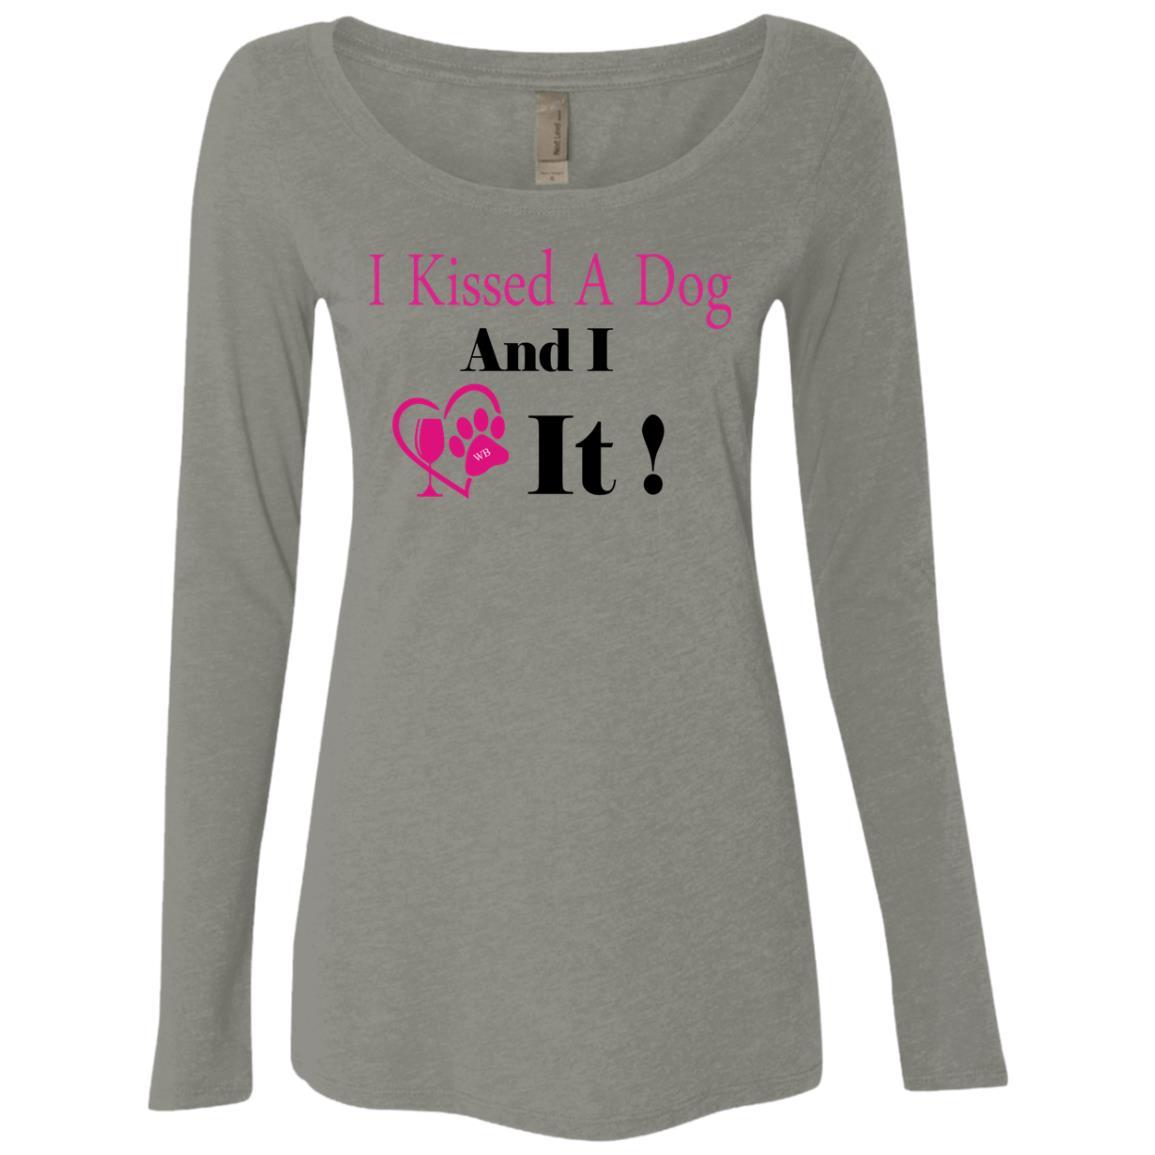 T-Shirts Venetian Grey / S WineyBitches.co "I Kissed A Dog And I Loved It:" Ladies' Triblend LS Scoop WineyBitchesCo